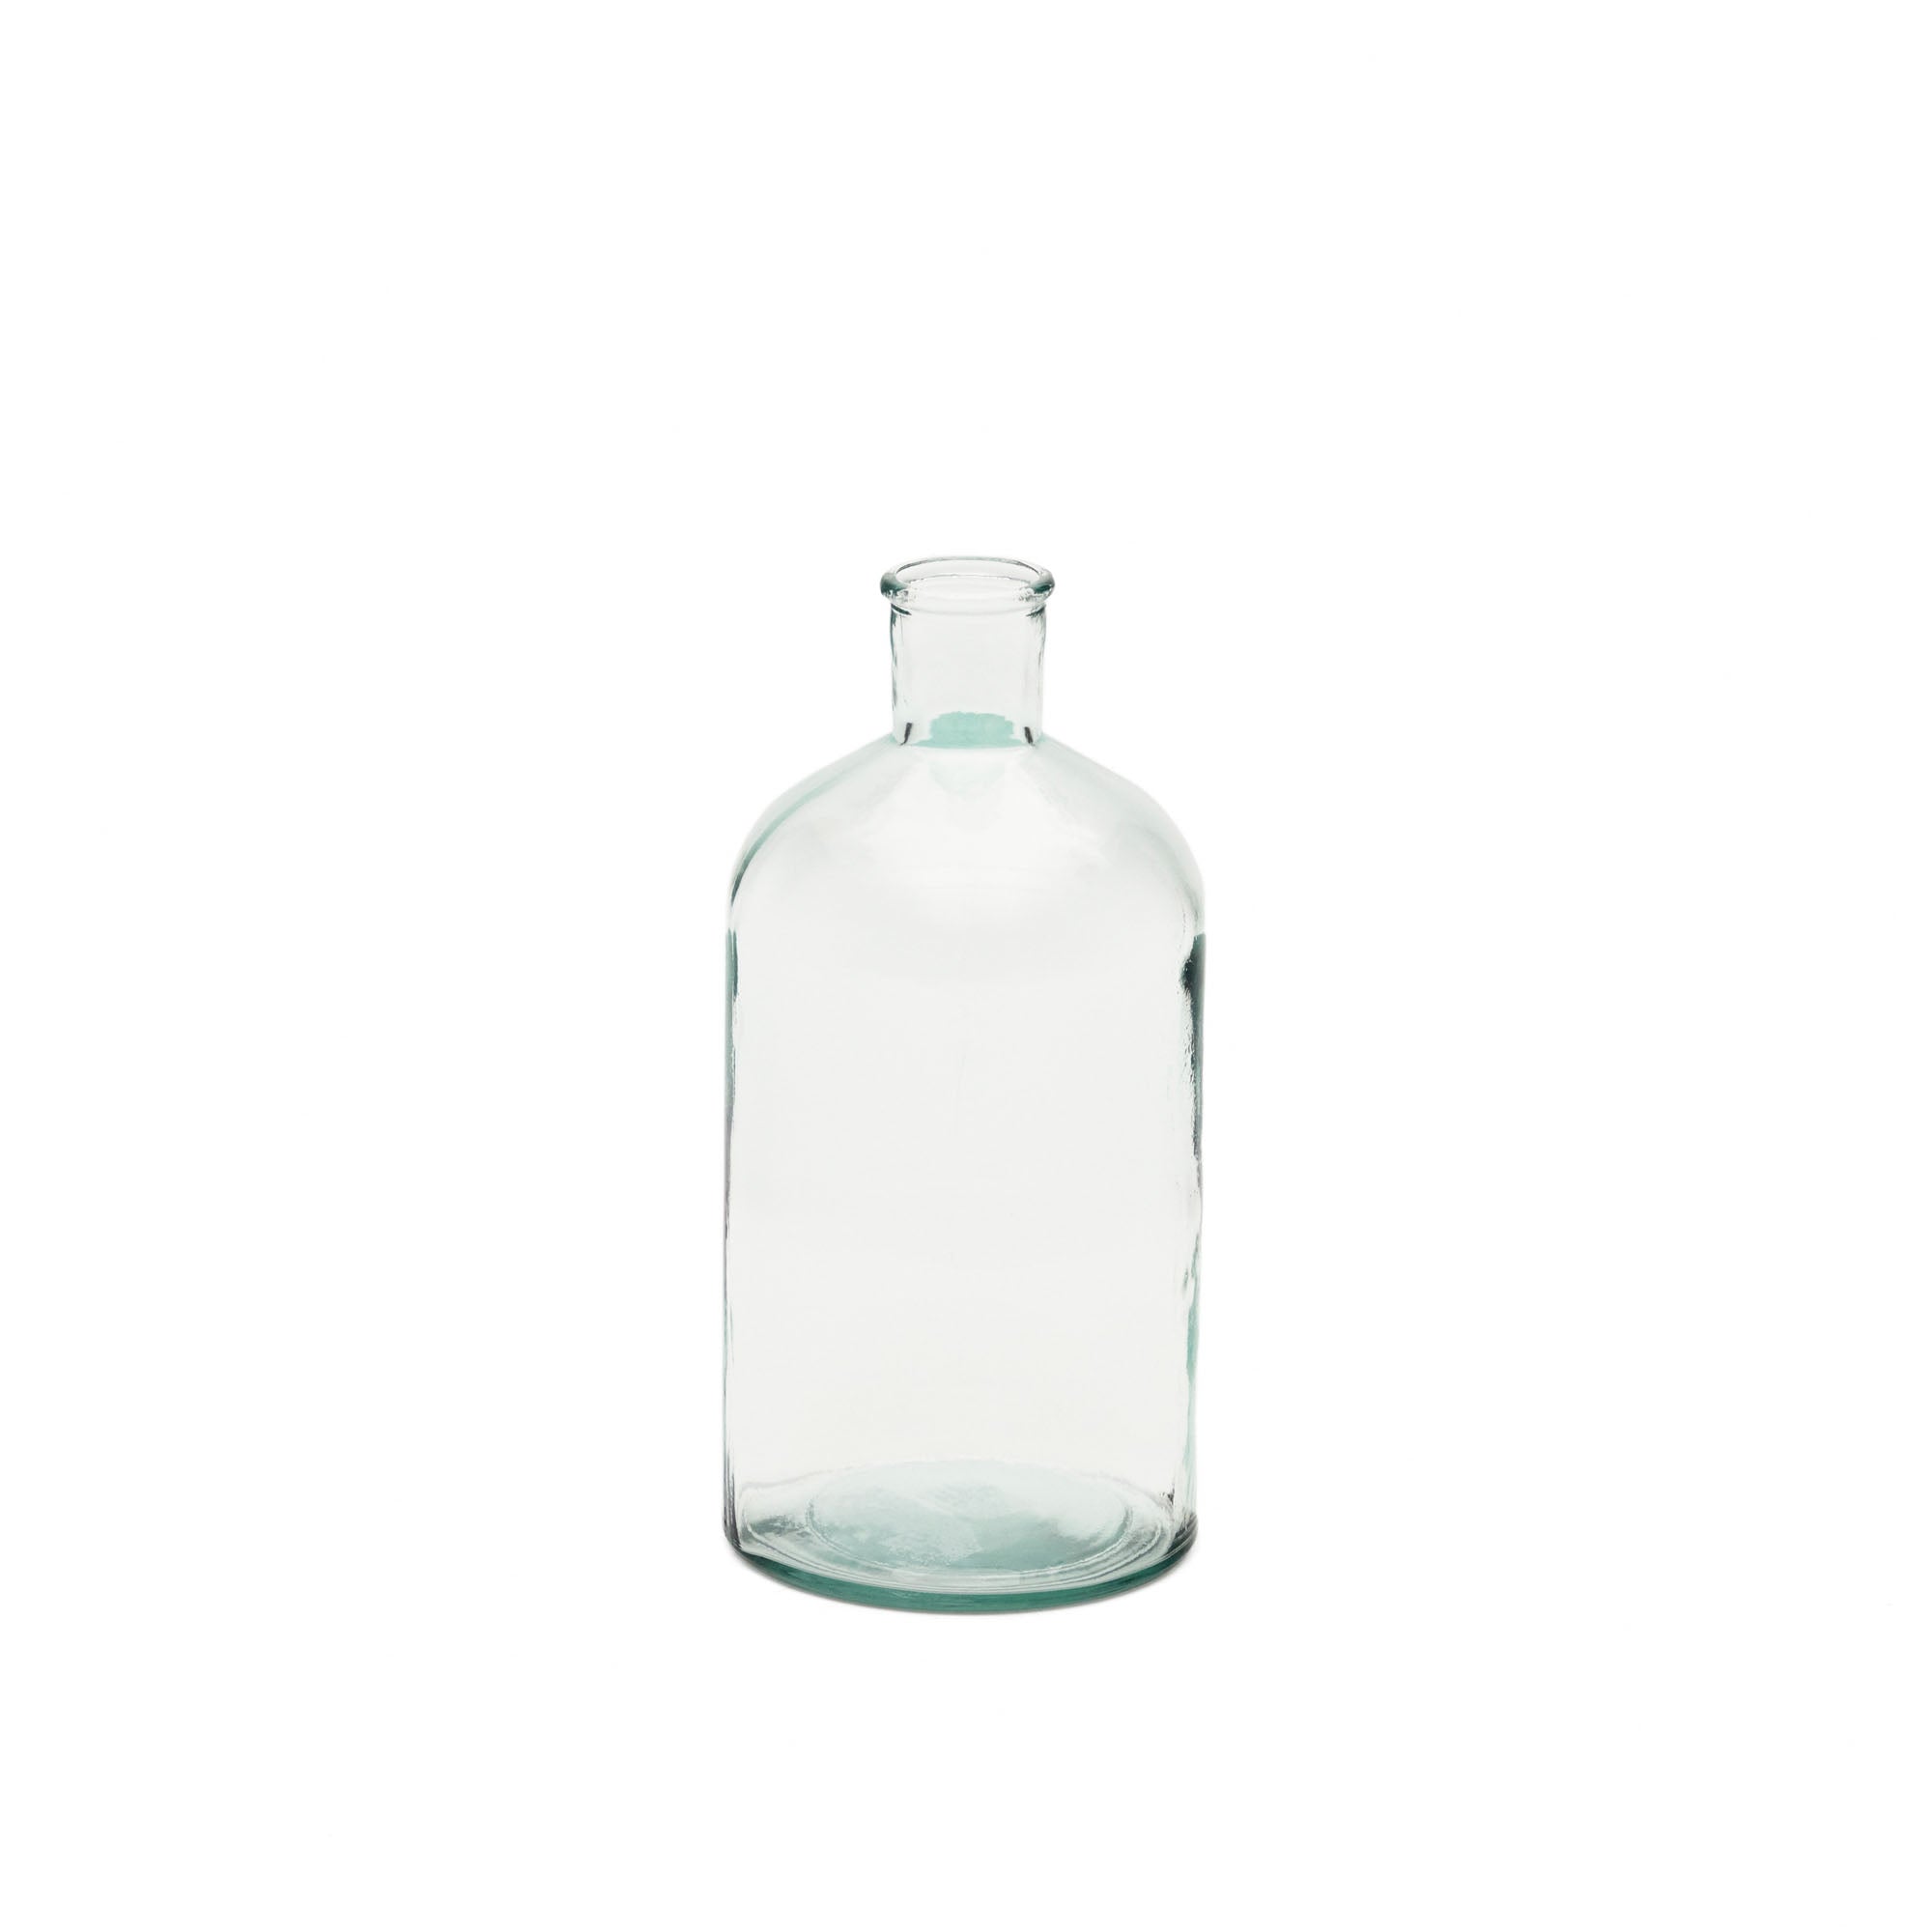 Brenna vase in 100% recycled transparent glass, 28 cm